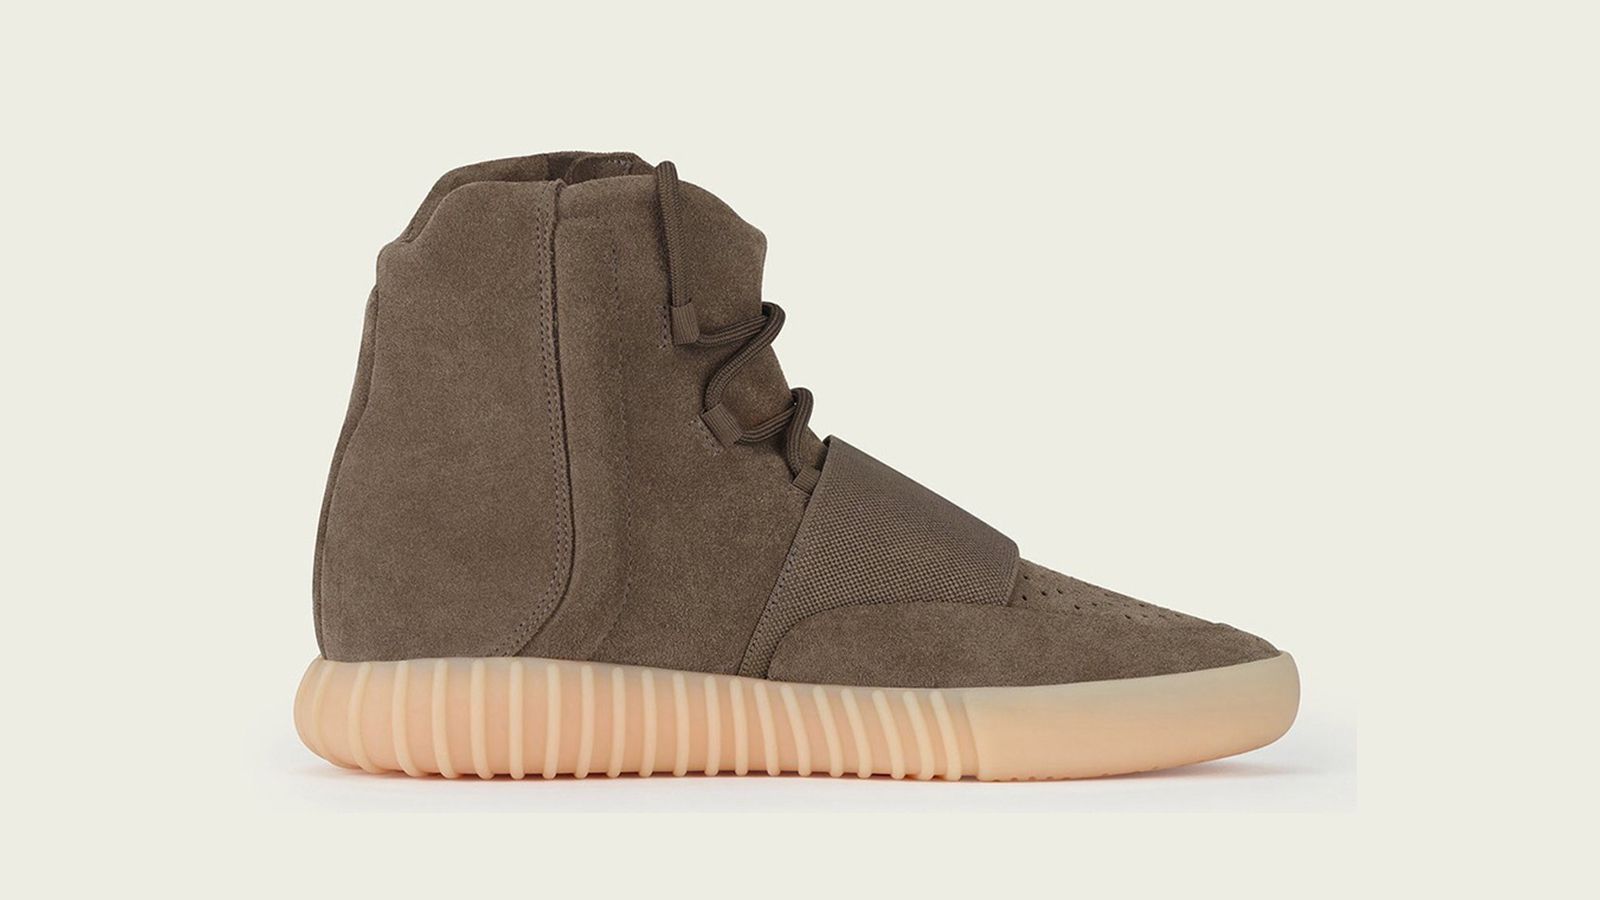 Yeezy BOOST 750 Brown are here